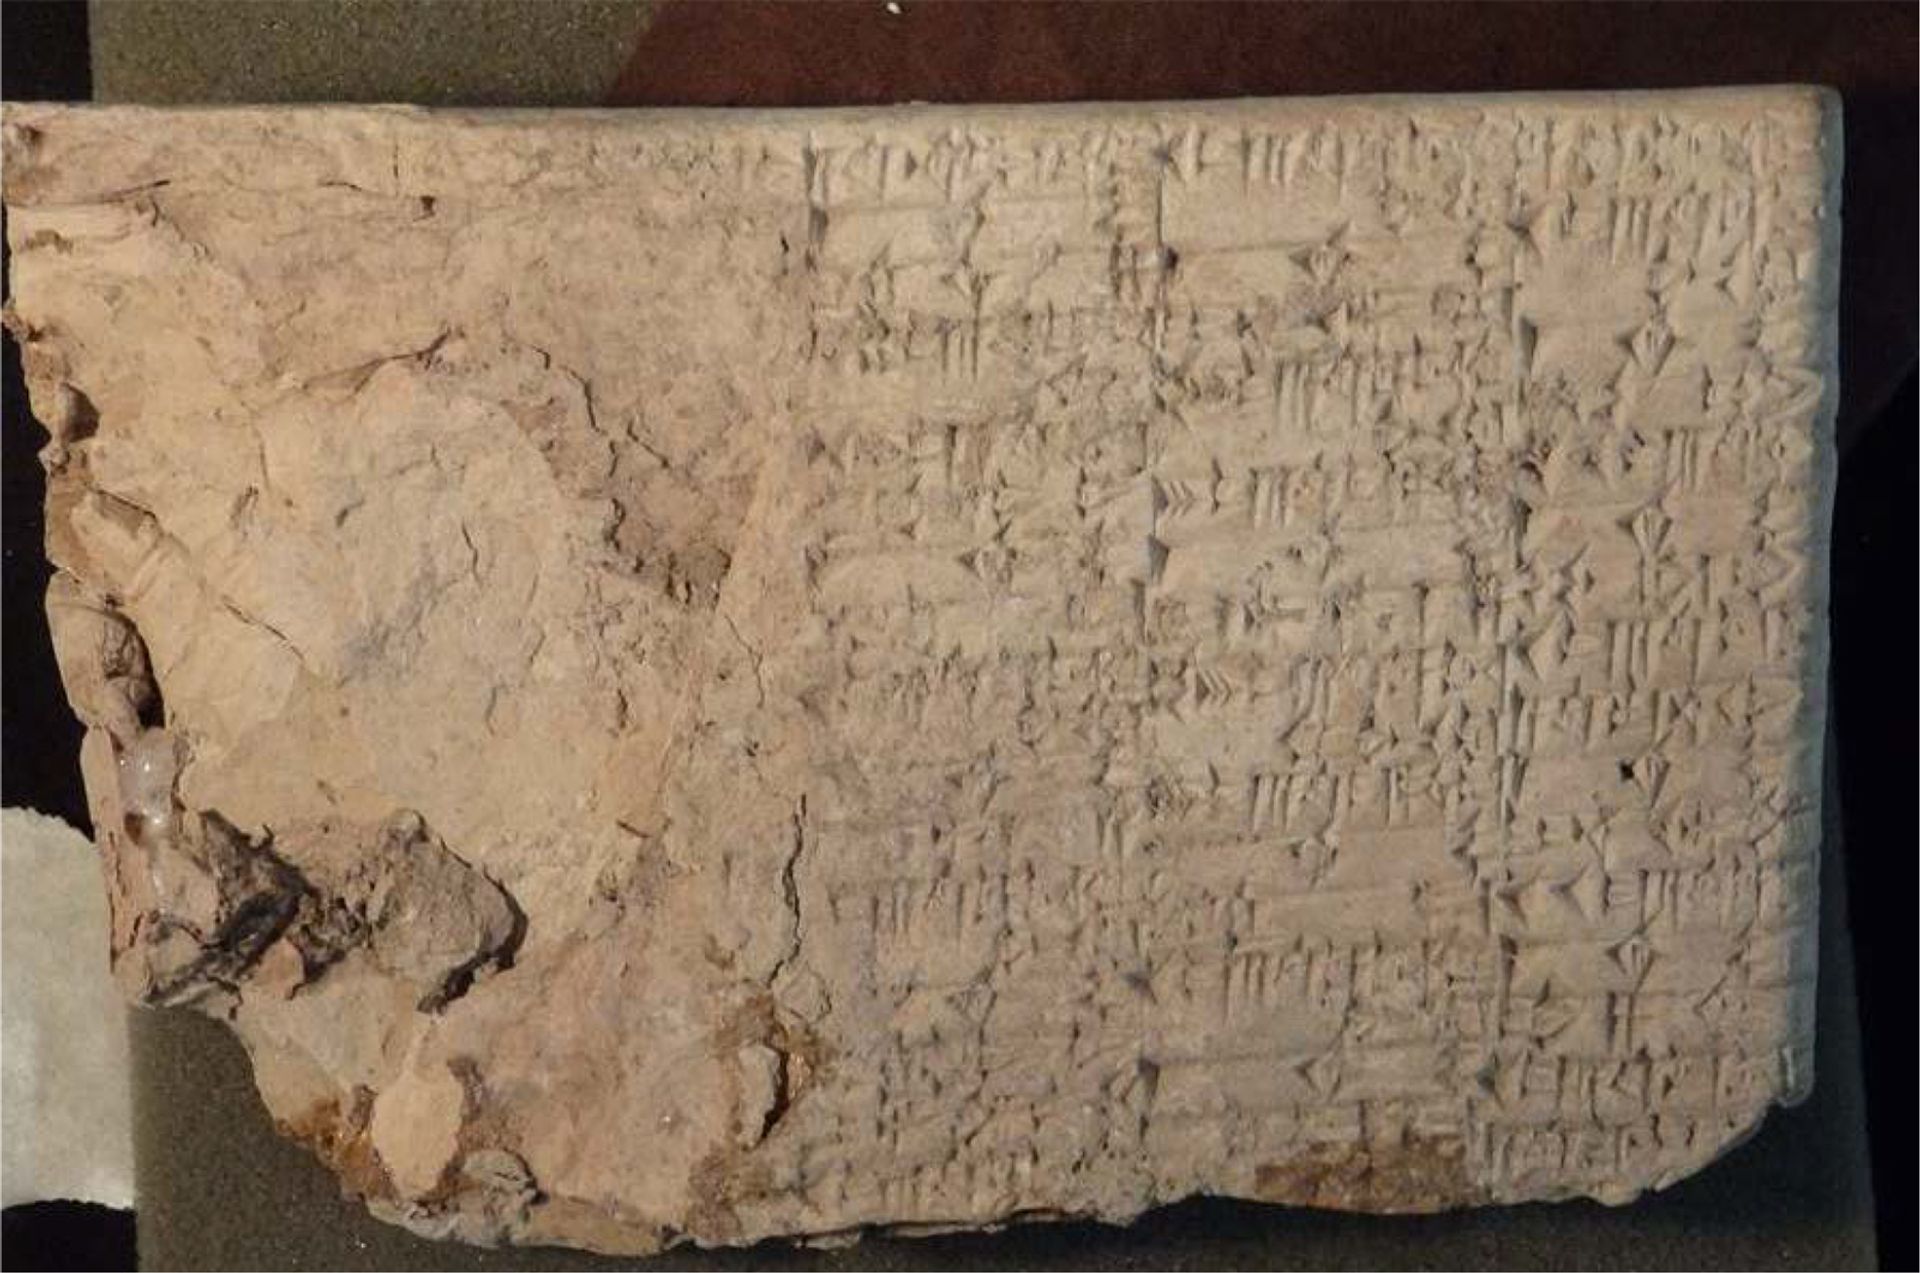 One of the cuneiform tablets that Hobby Lobby's owner "accidentally" smuggled into the US Department of Justice, US Attorney’s Office, Eastern District of New York